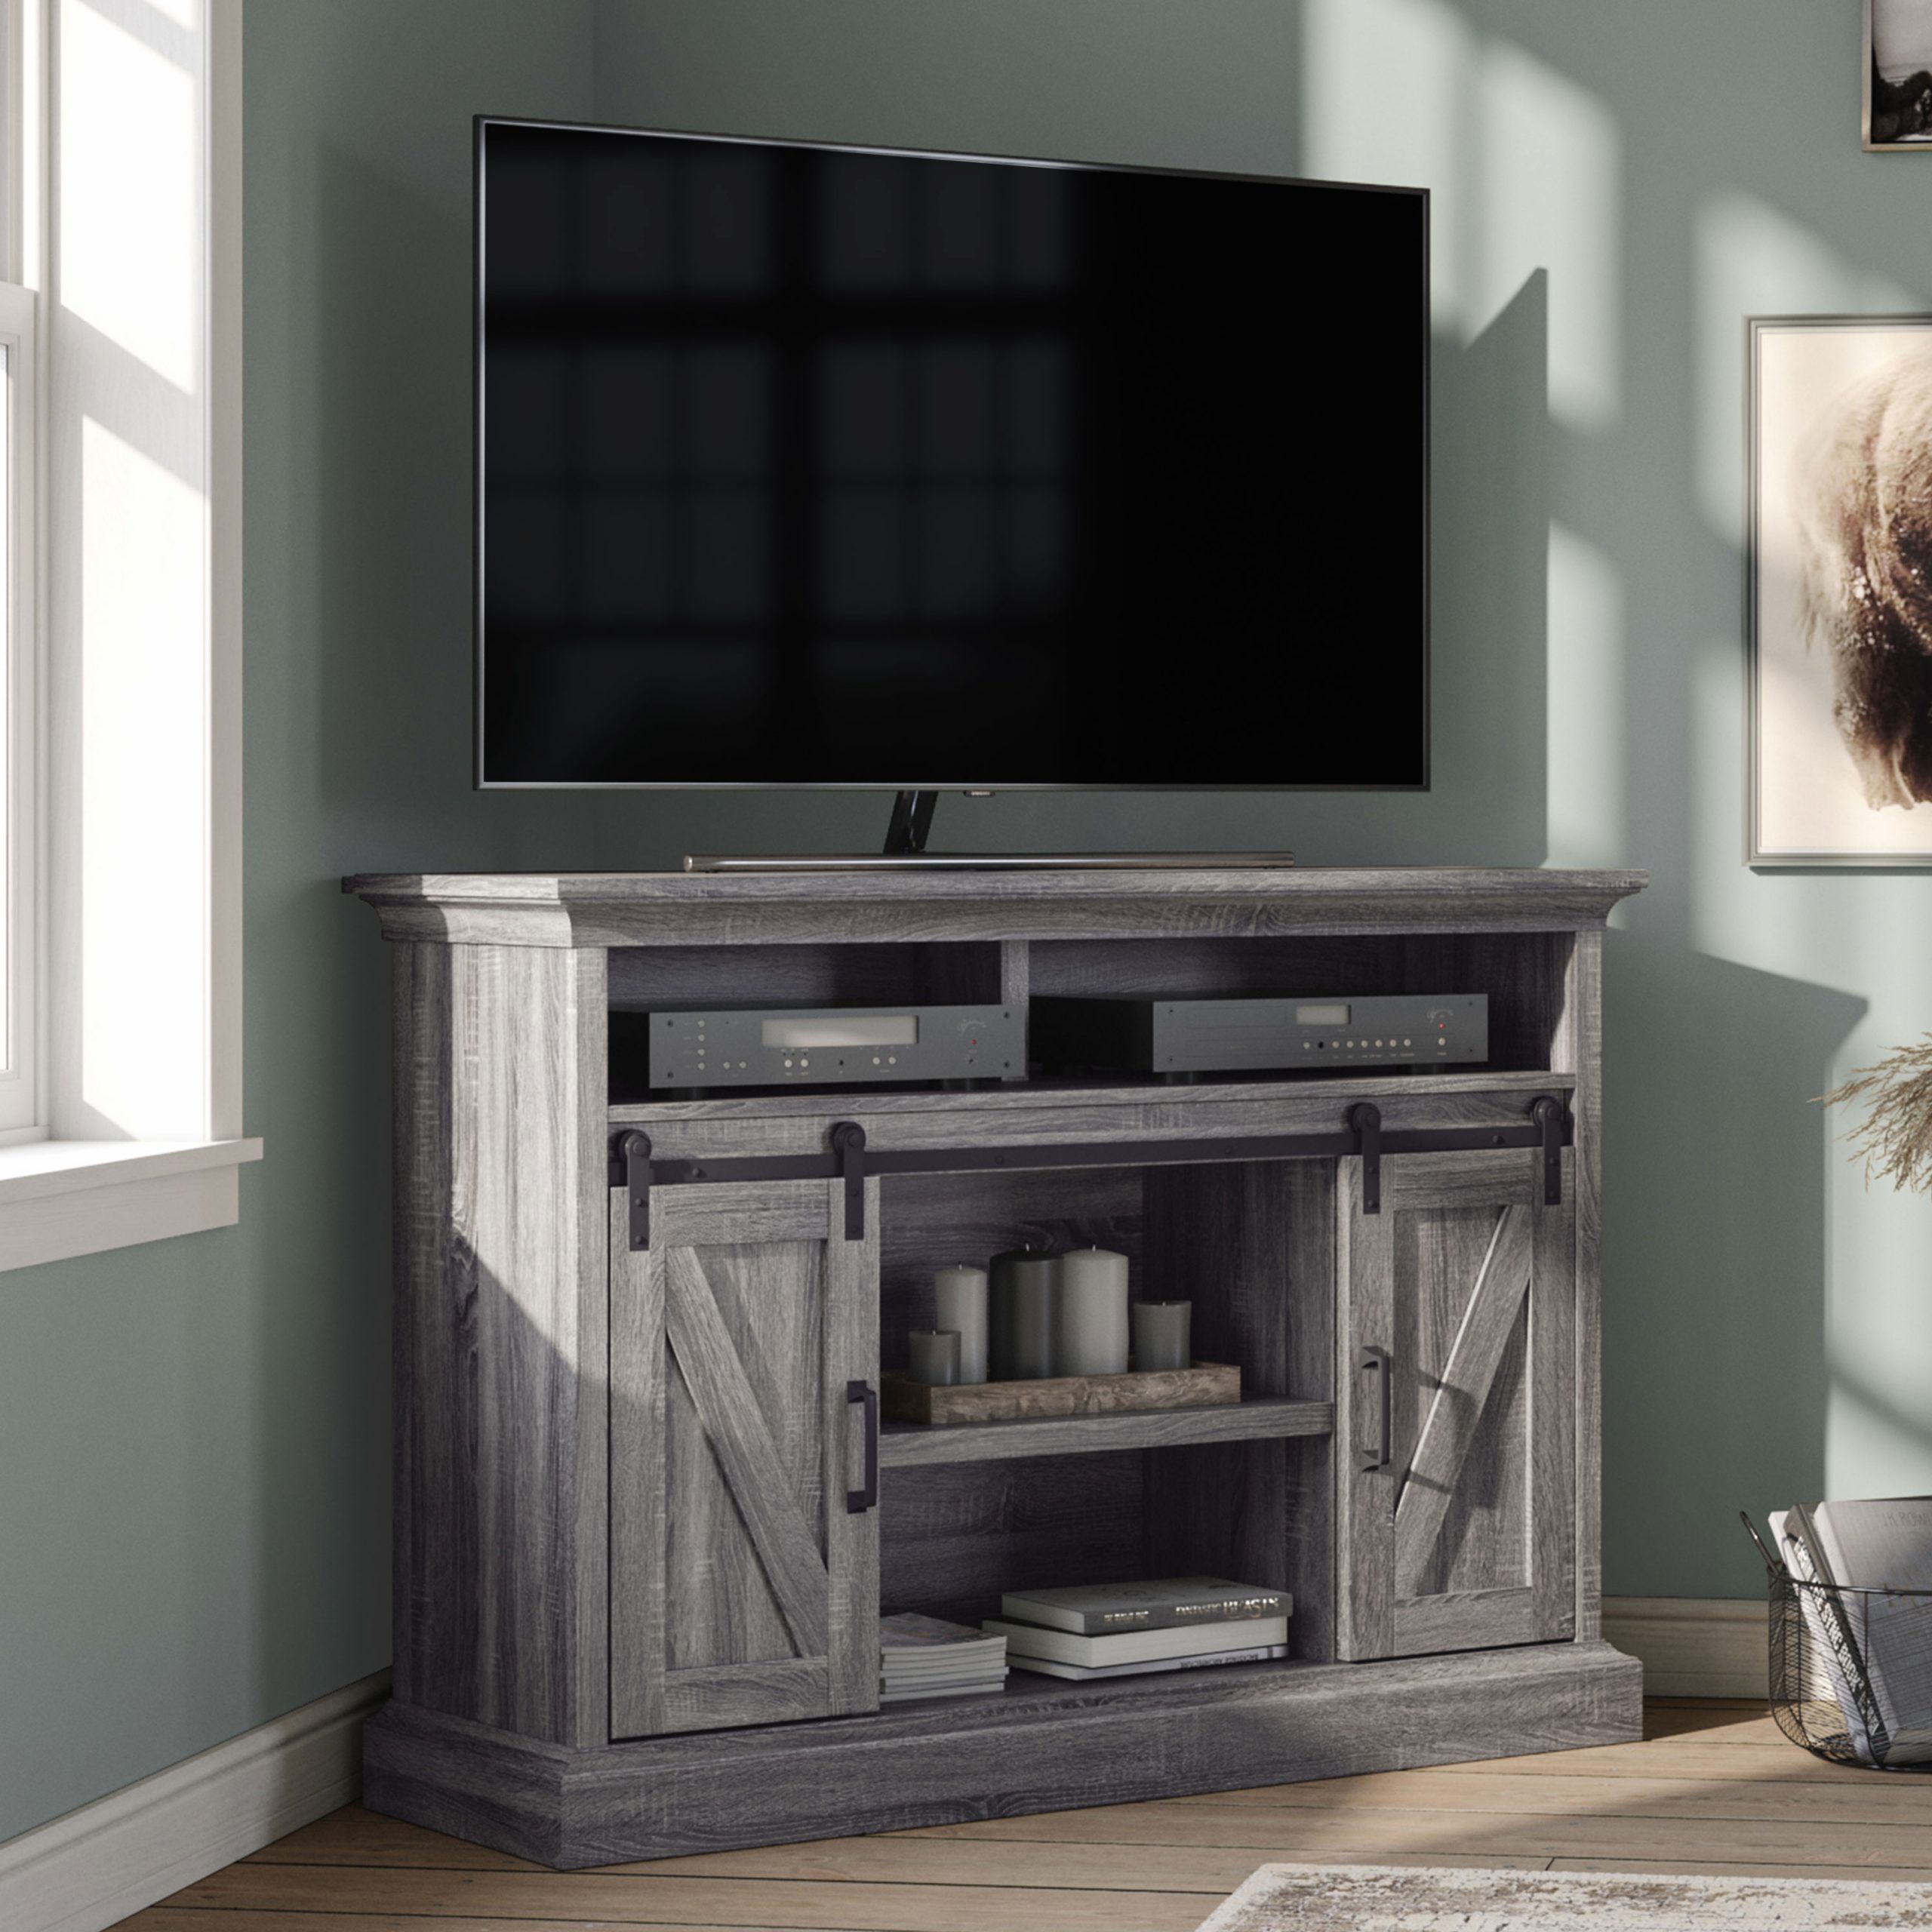 Whalen Allston Barn Door Corner Tv Stand For 55" Tvs, Gray With Twila Tv Stands For Tvs Up To 55&quot; (View 3 of 15)